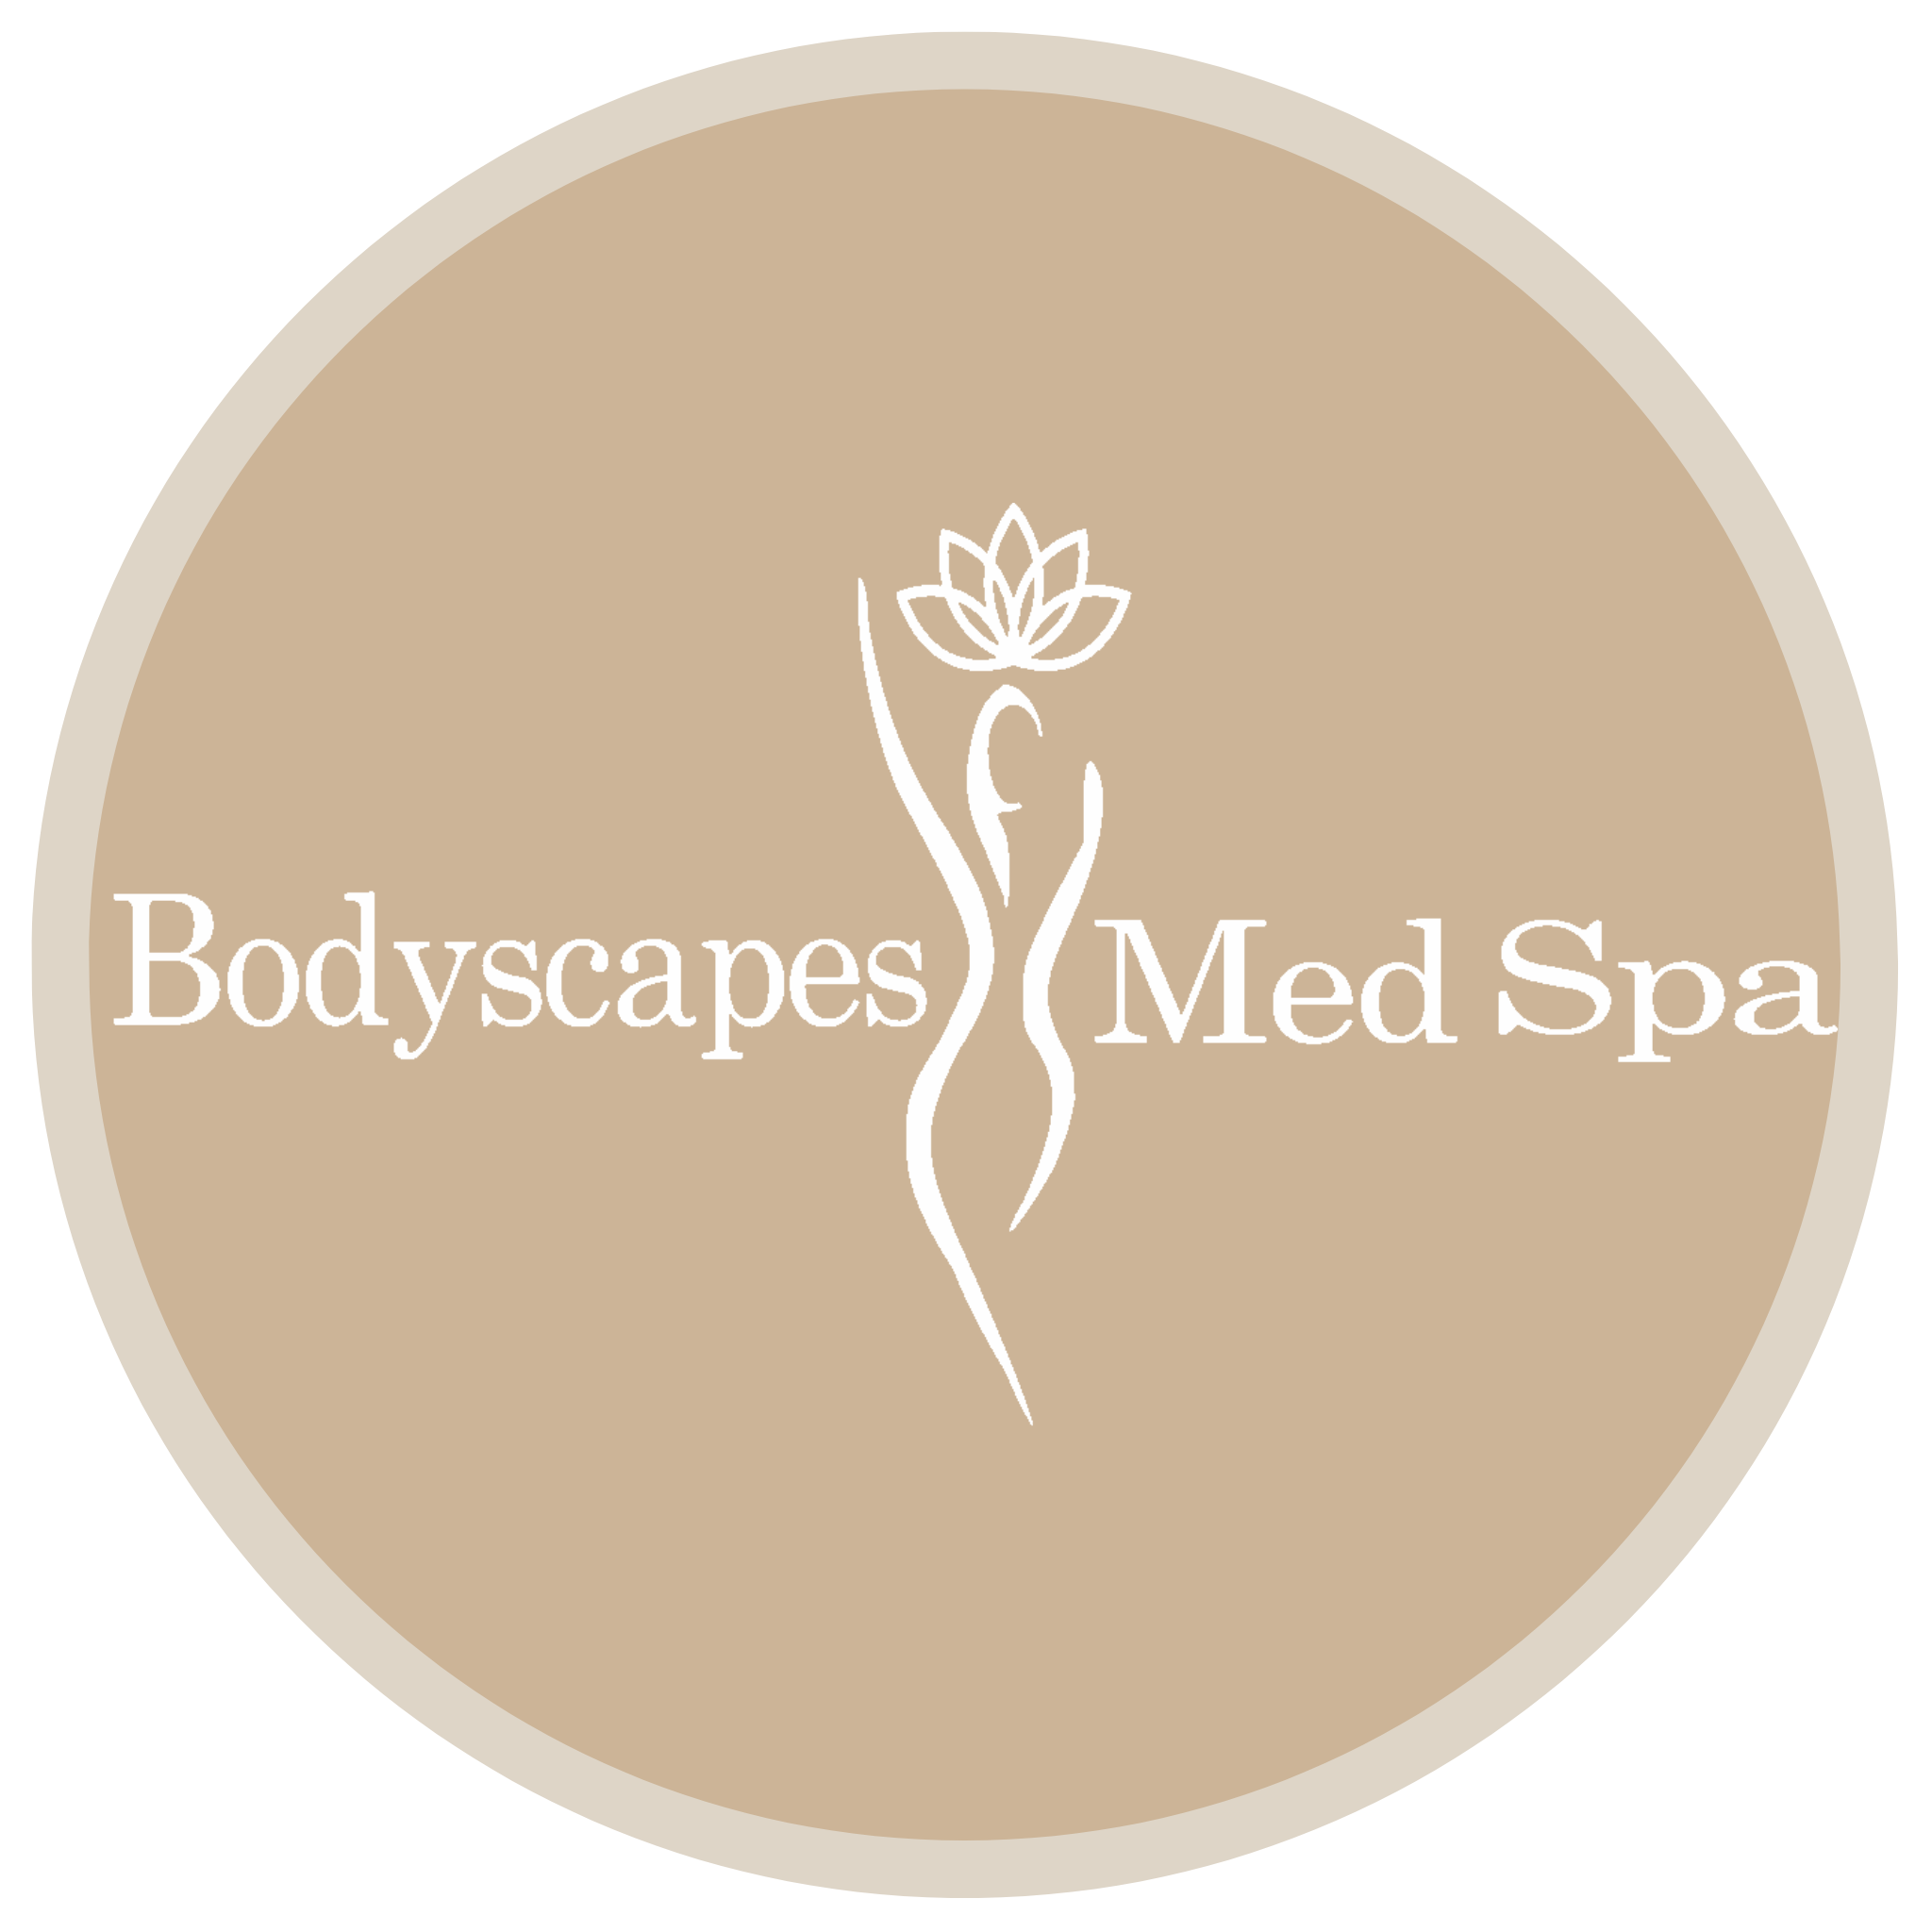 Bodyscapes Med Spa: Relax and Rejuvenate